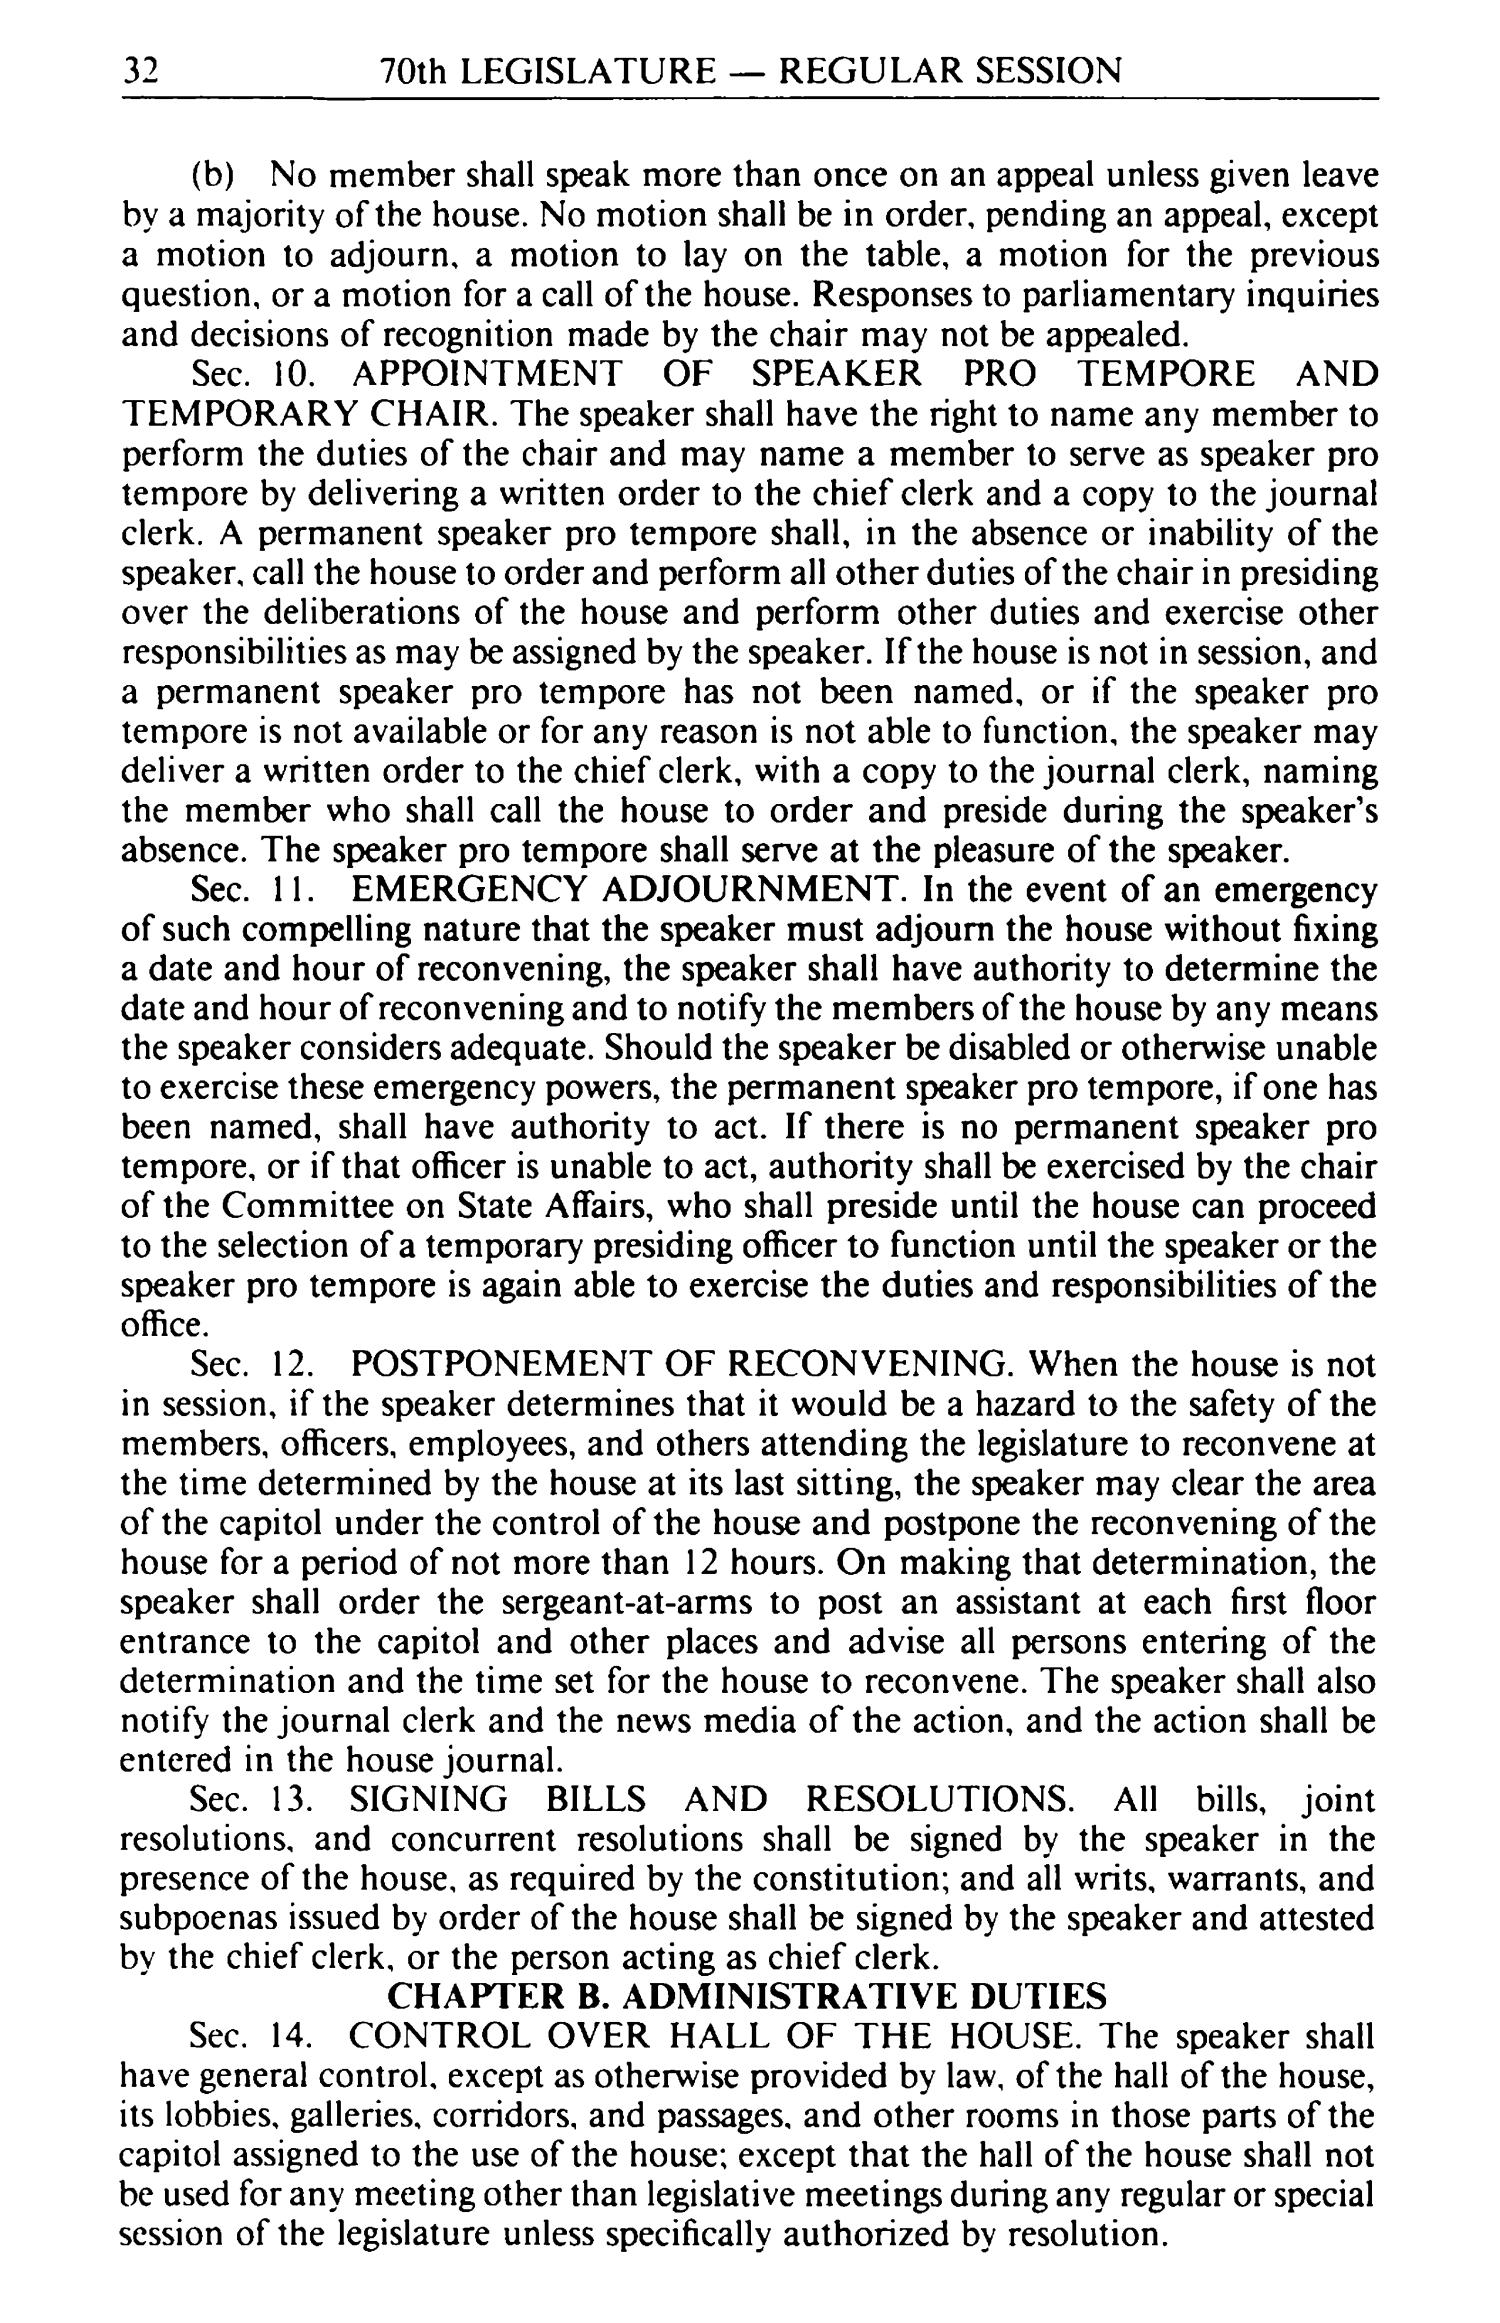 Journal of the House of Representatives of the Regular Session of the Seventieth Legislature of the State of Texas, Volume 1
                                                
                                                    32
                                                